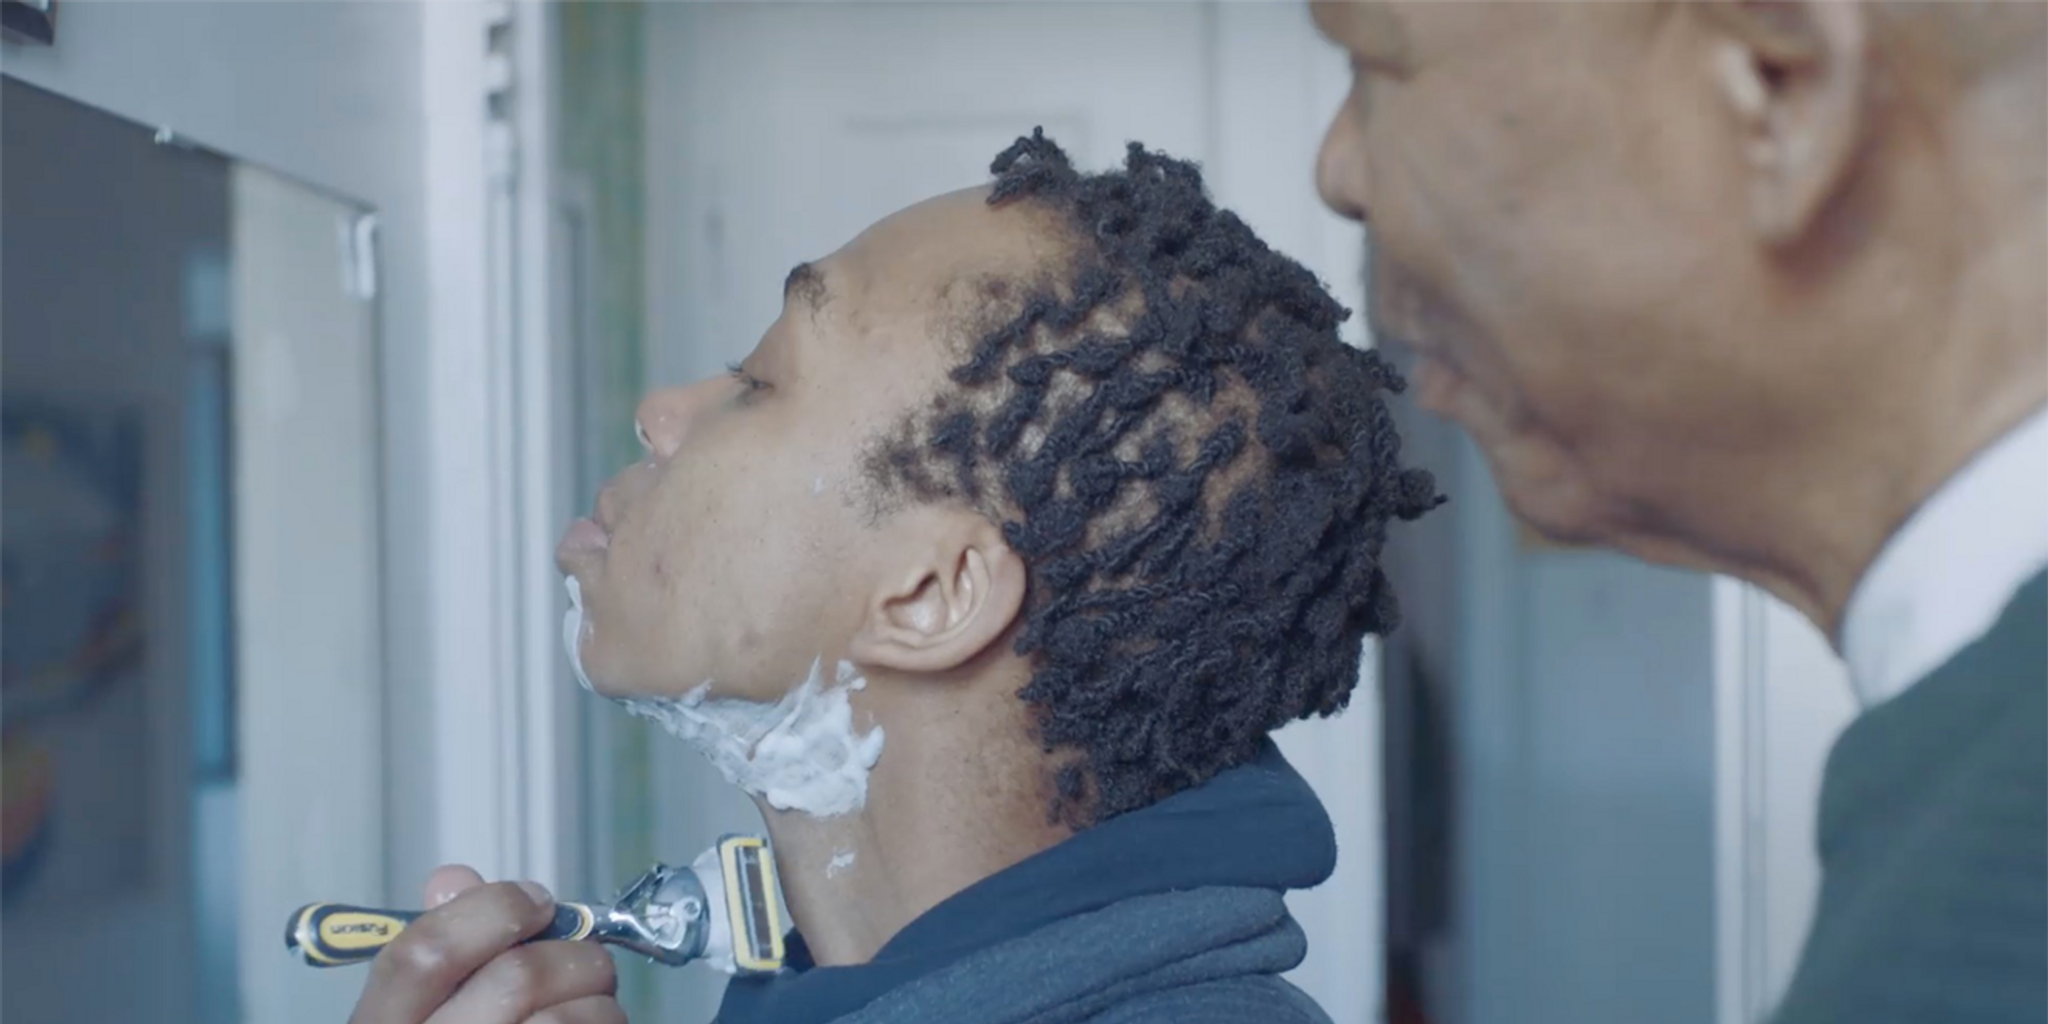 Gillette advert makes masculinity more inclusive